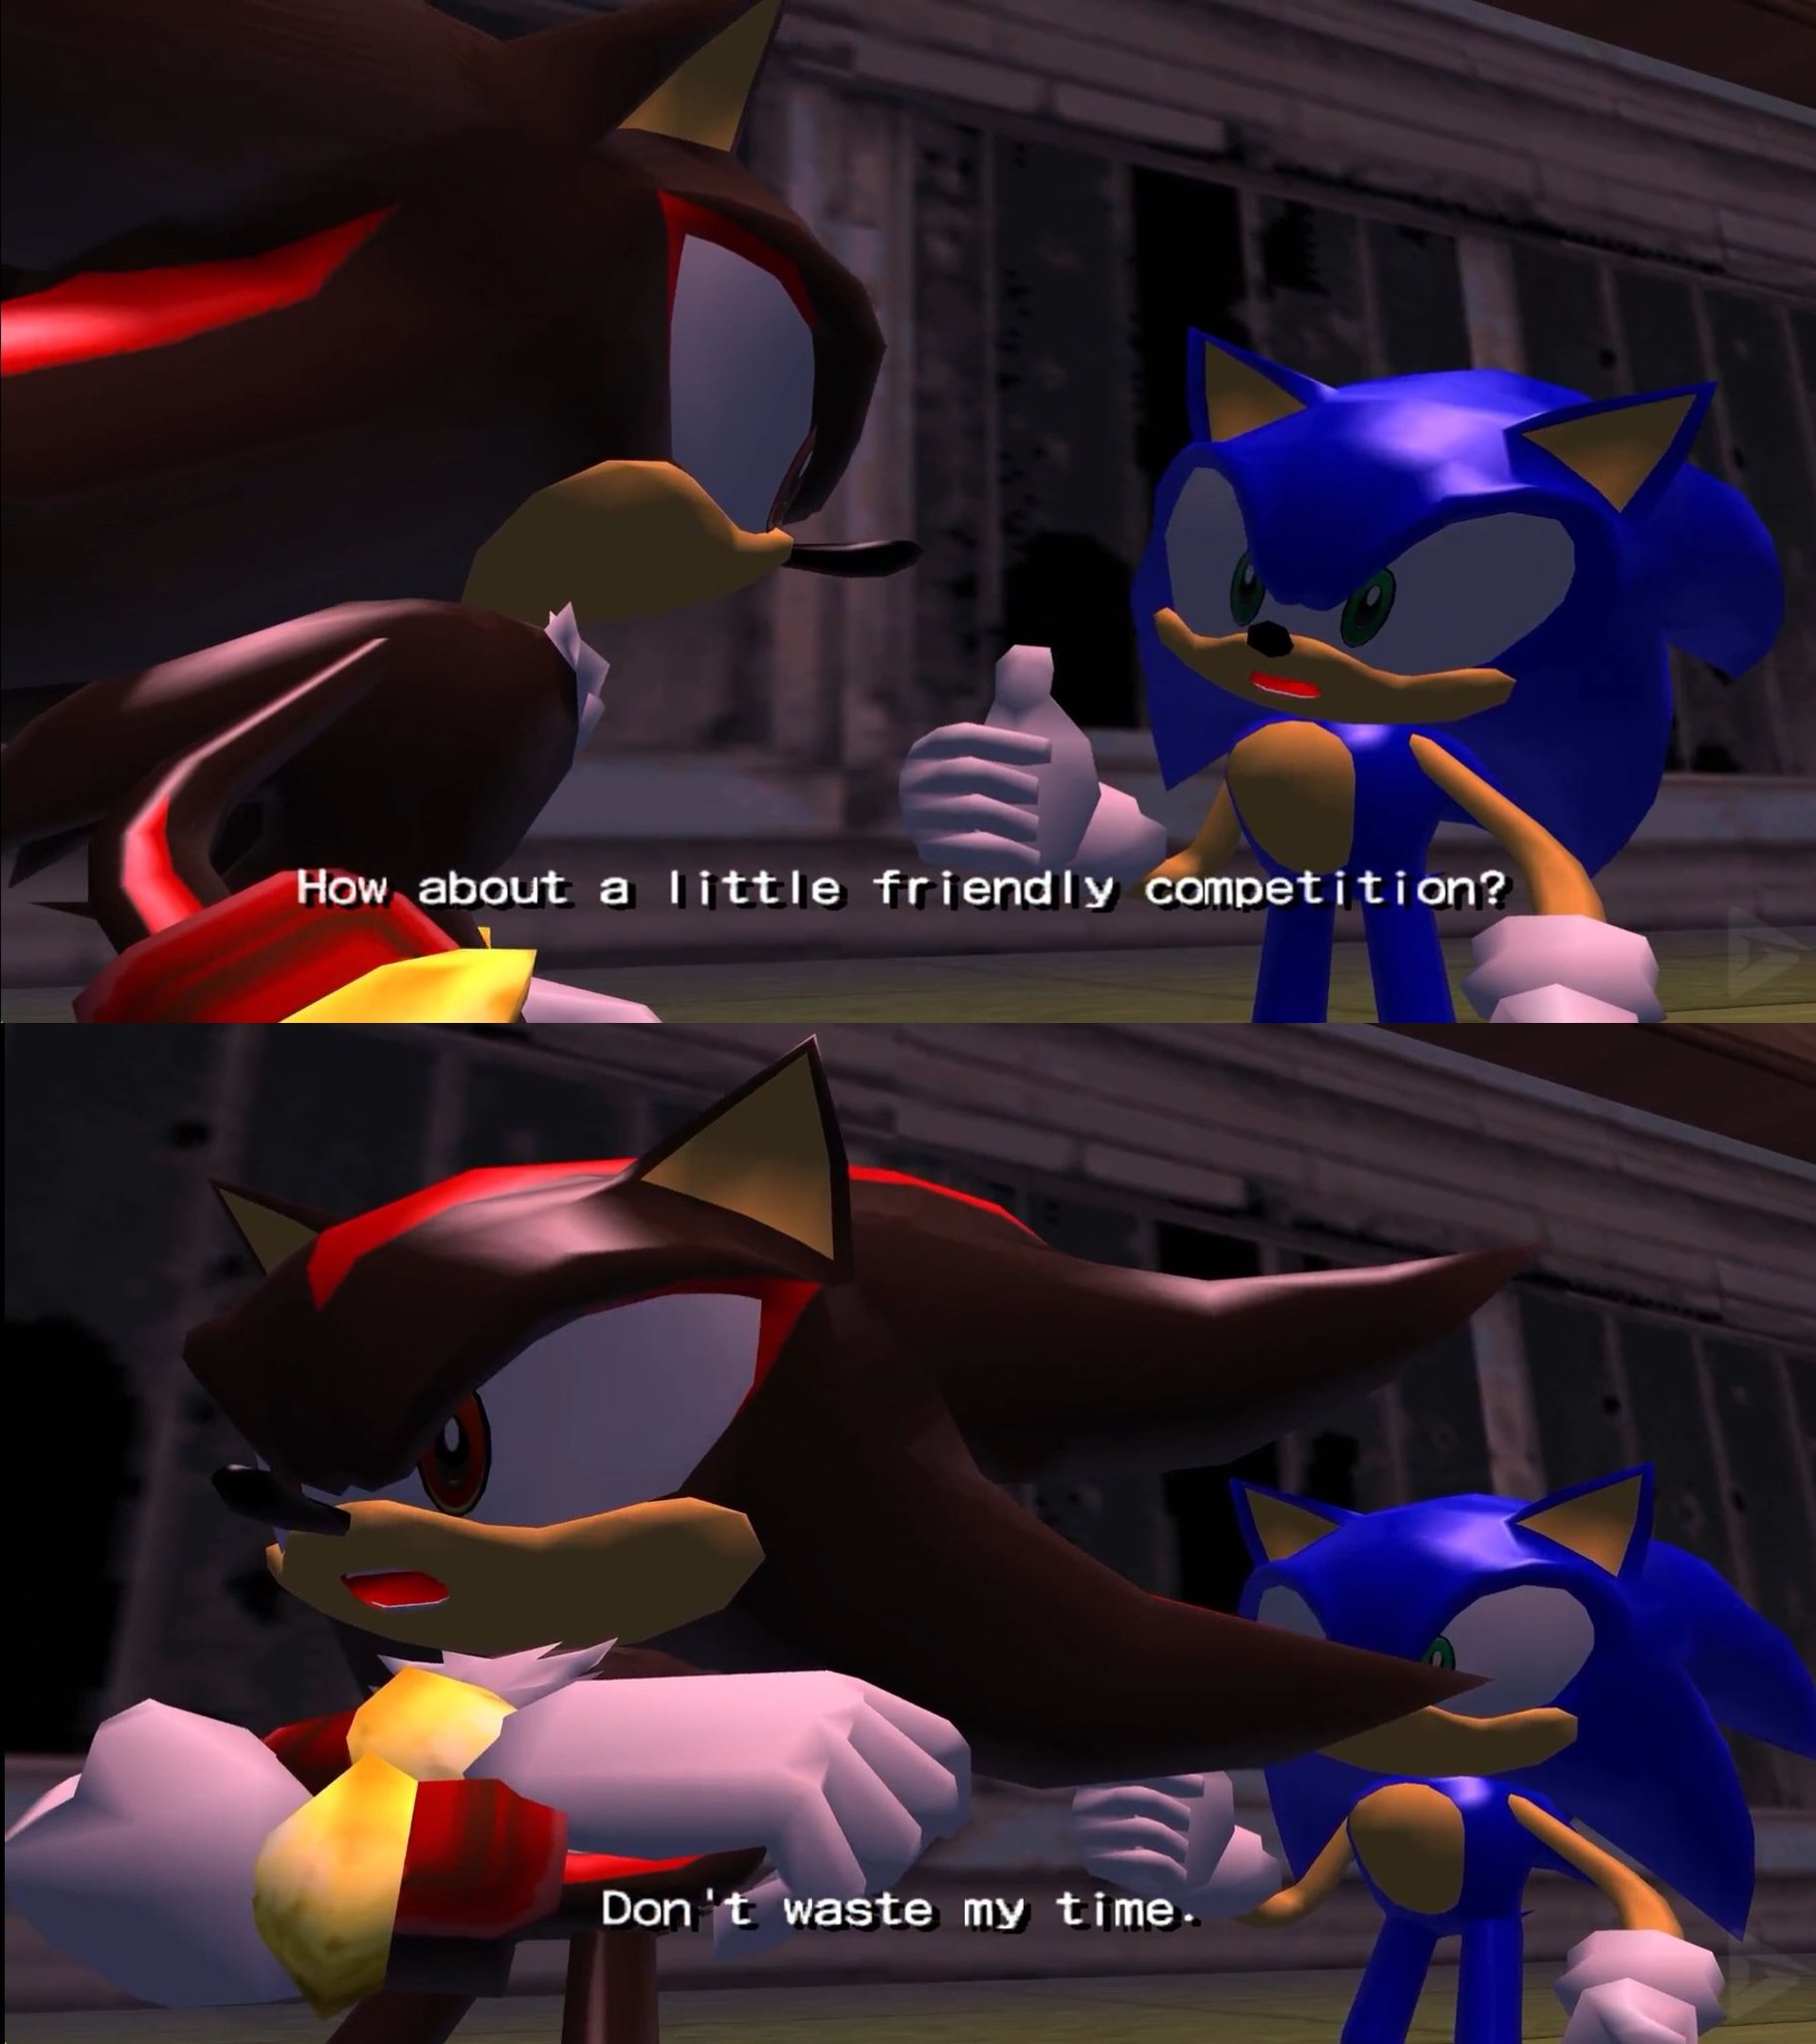 KrACK 🥂 on X: What's this meme that Shadow is slightly slower than Sonic  when this has literally never been the case? Where did this come from?  Every single canon source says